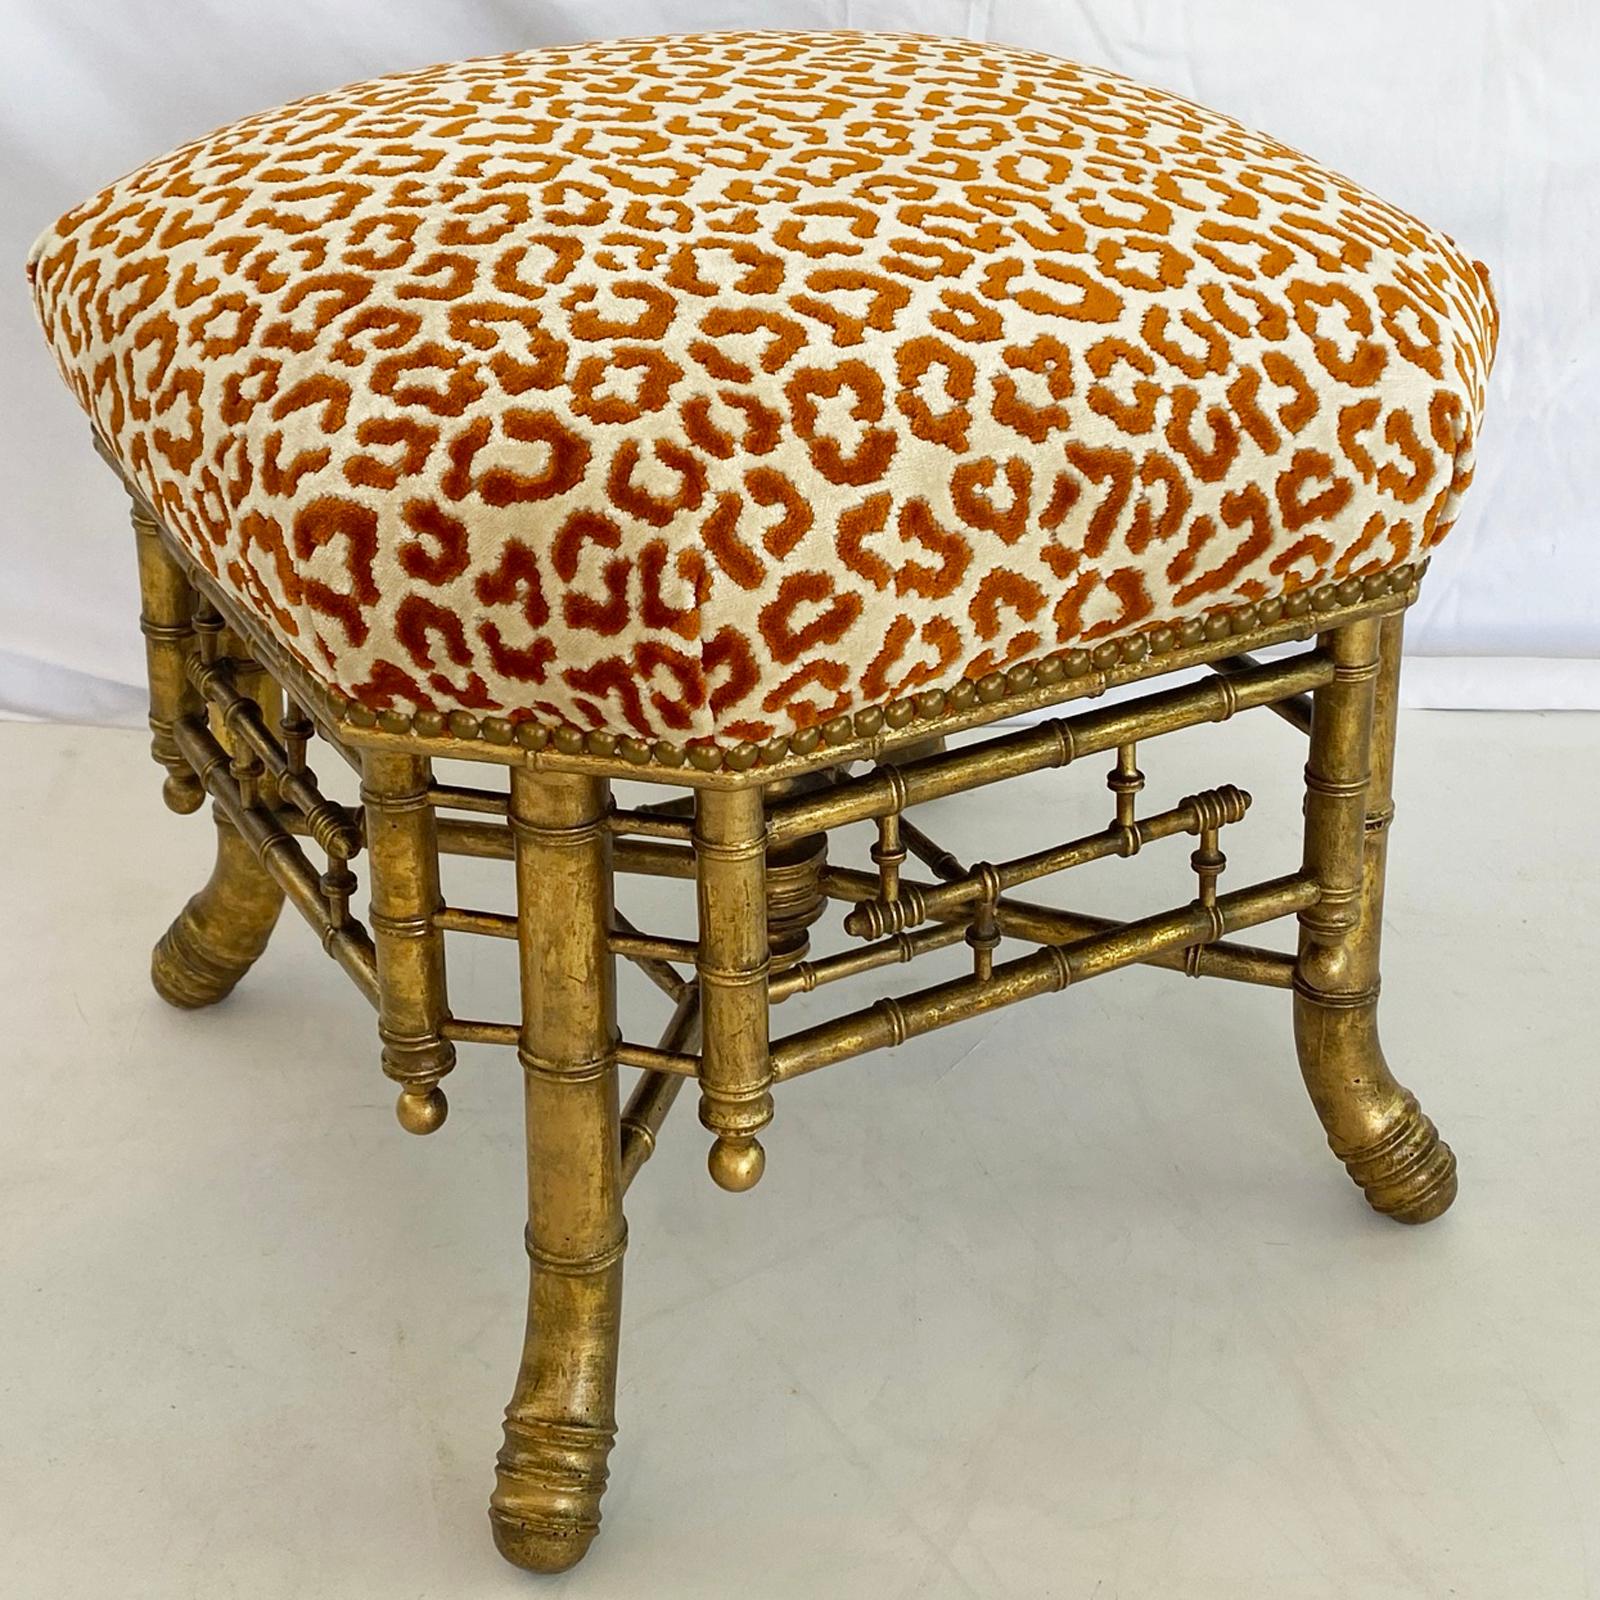 English Chinese Chippendale style gilded faux bamboo stool from the mid-19th century, its square crown seat with canted corners upholstered with a leopard print cut velvet in orange and cream colorway with nailheads, raised on four splaying legs,